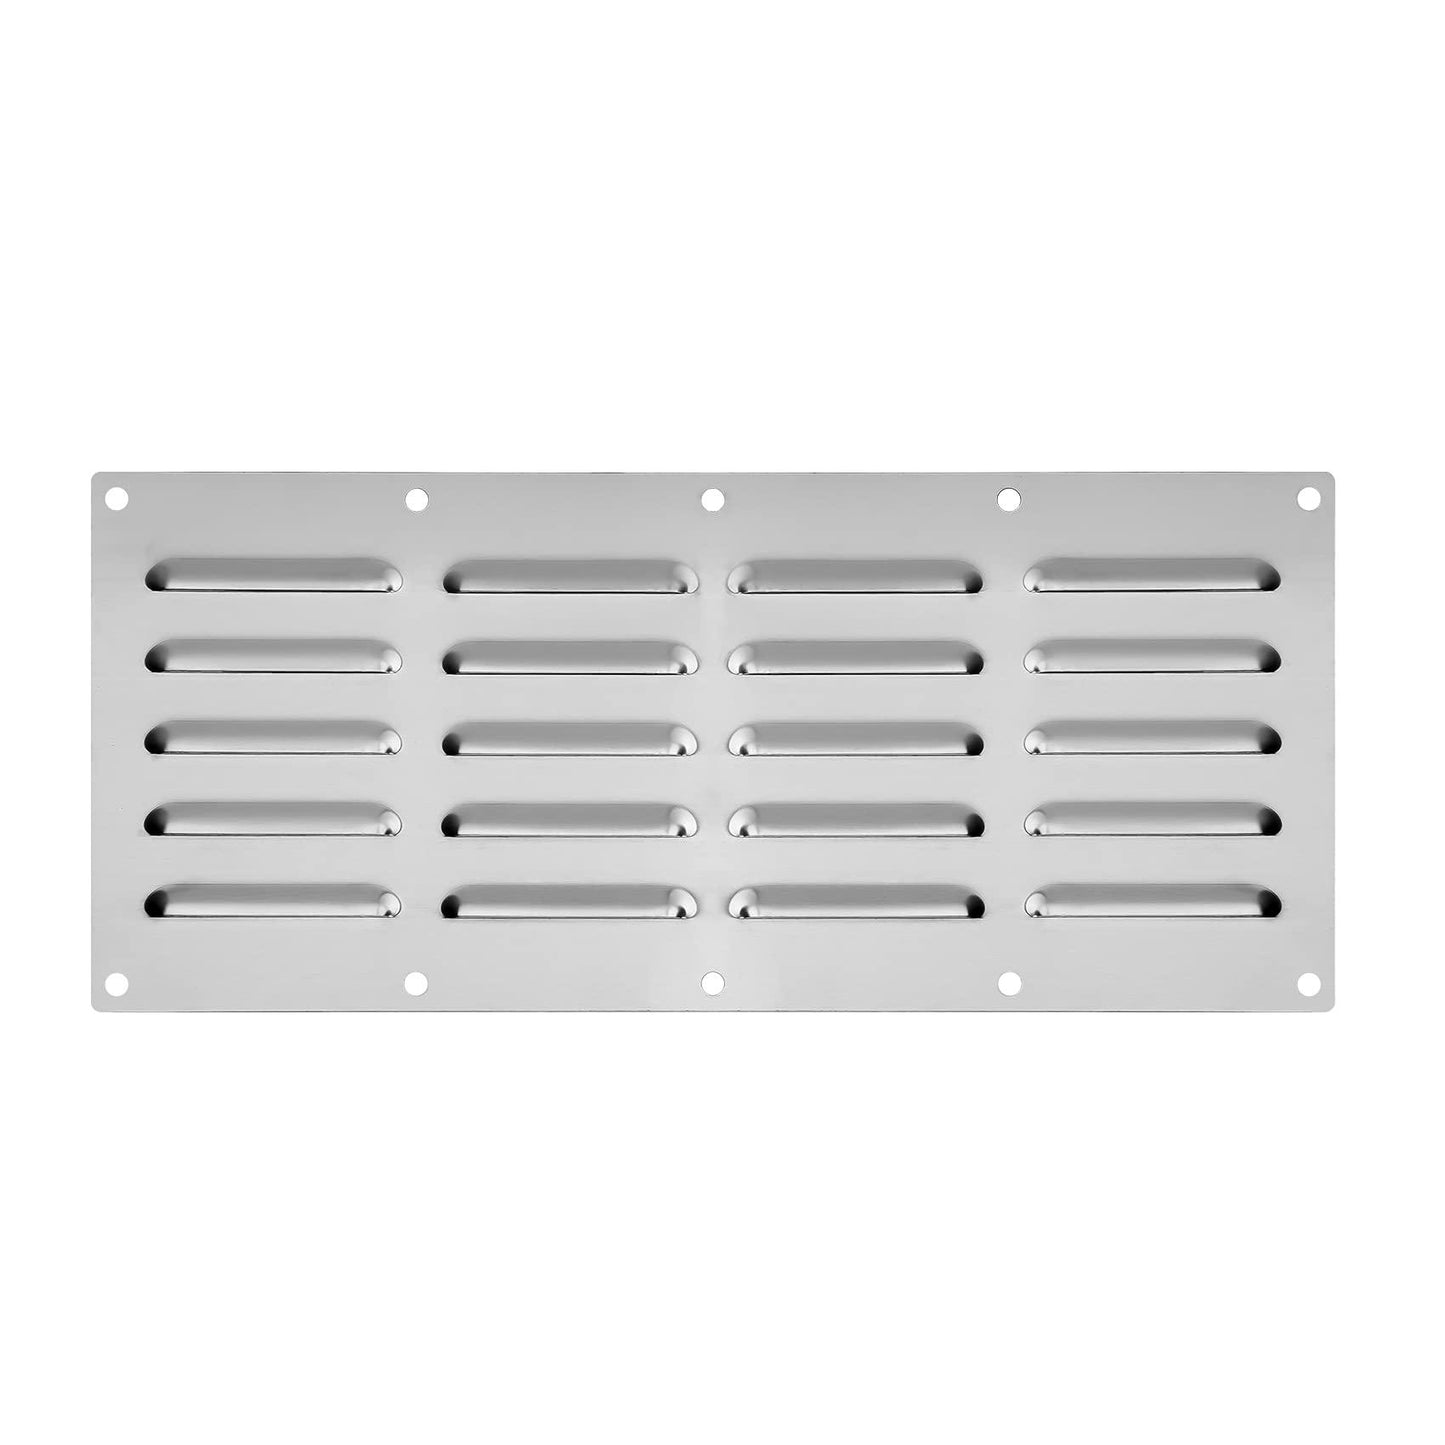 Stanbroil Stainless Steel Venting Panel for Grill Accessory, 15" by 6-1/2" - CookCave